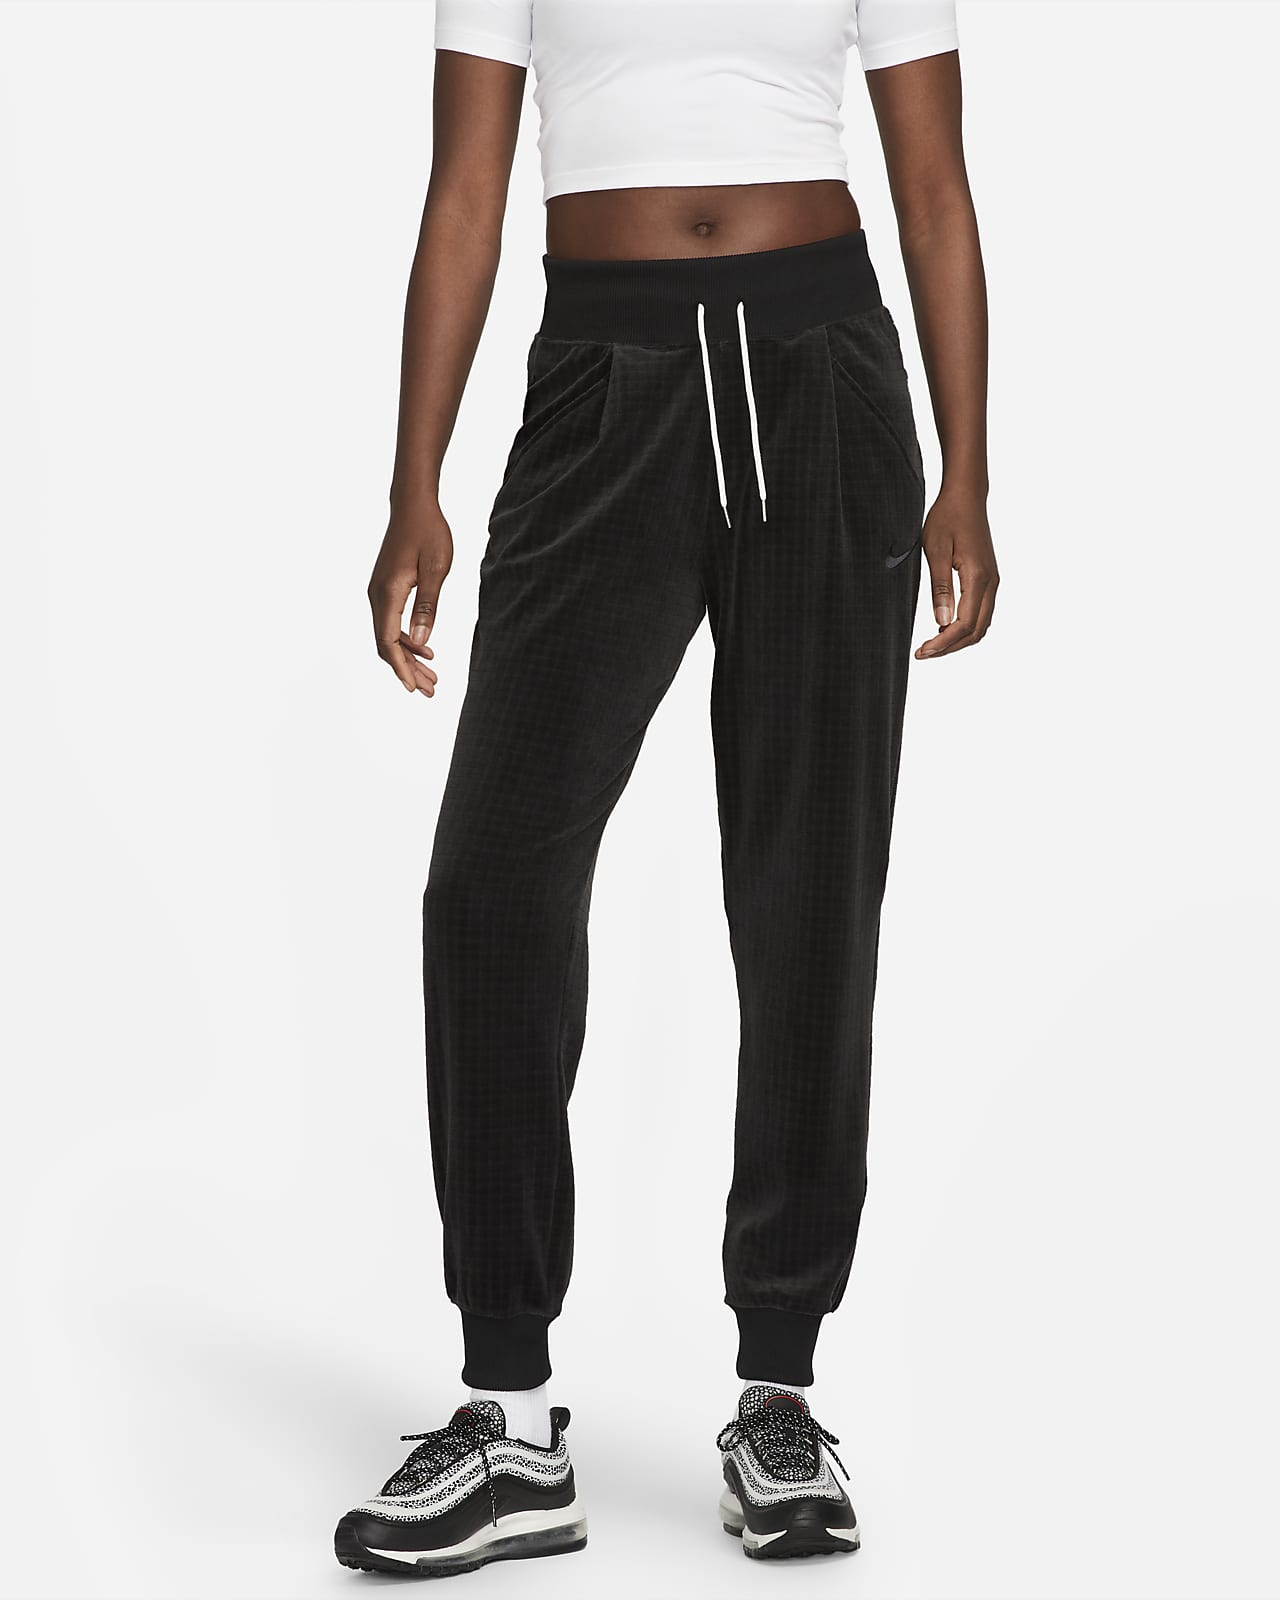 Cuffed Ankle Velour Tracksuit - Black